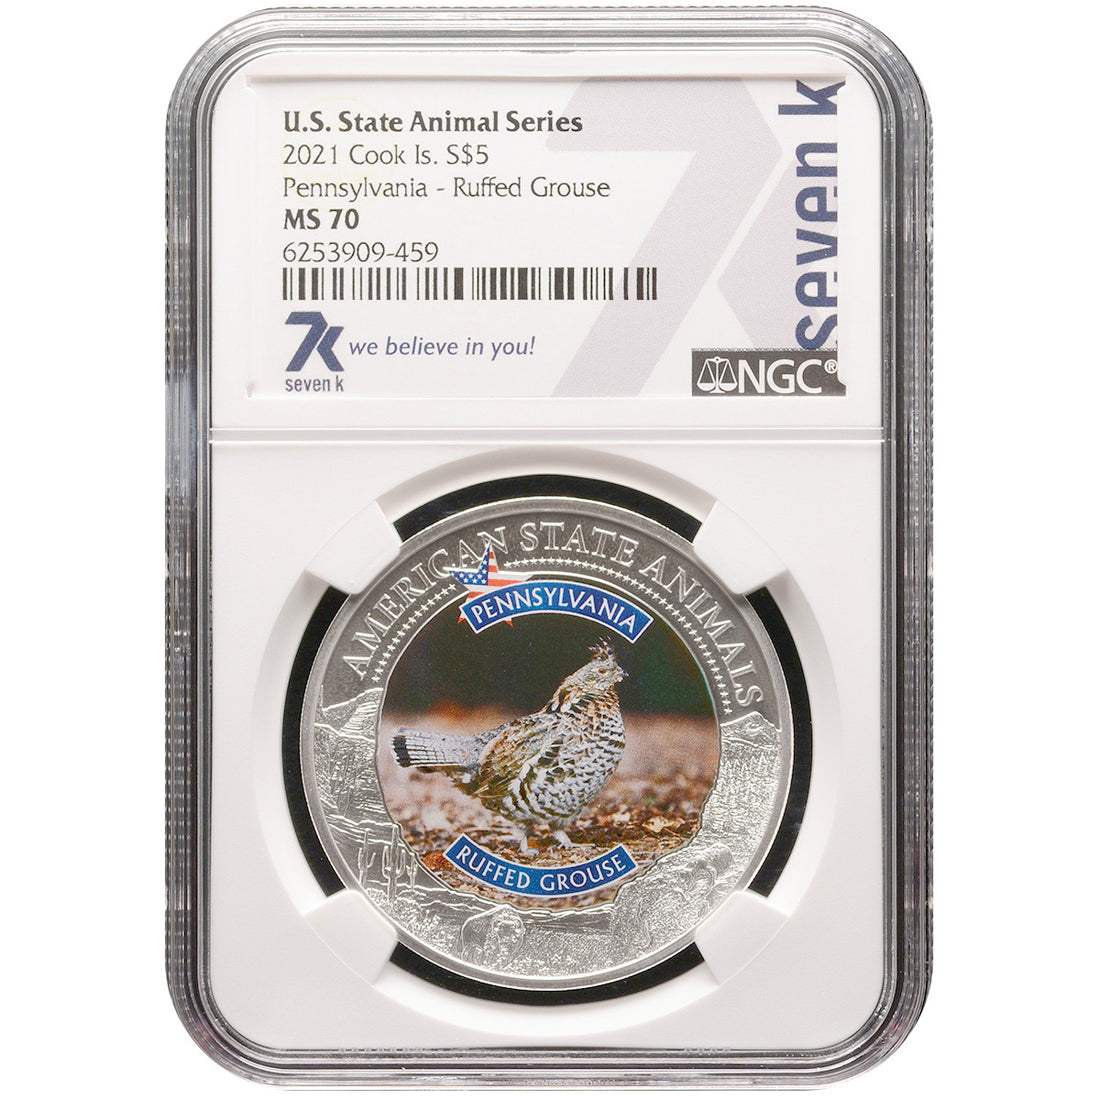 2021 Cook Islands PENNSYLVANIA RUFFED GROUSE Graded MS70 American State Animals 1 Oz Silver Coin - Oz Bullion